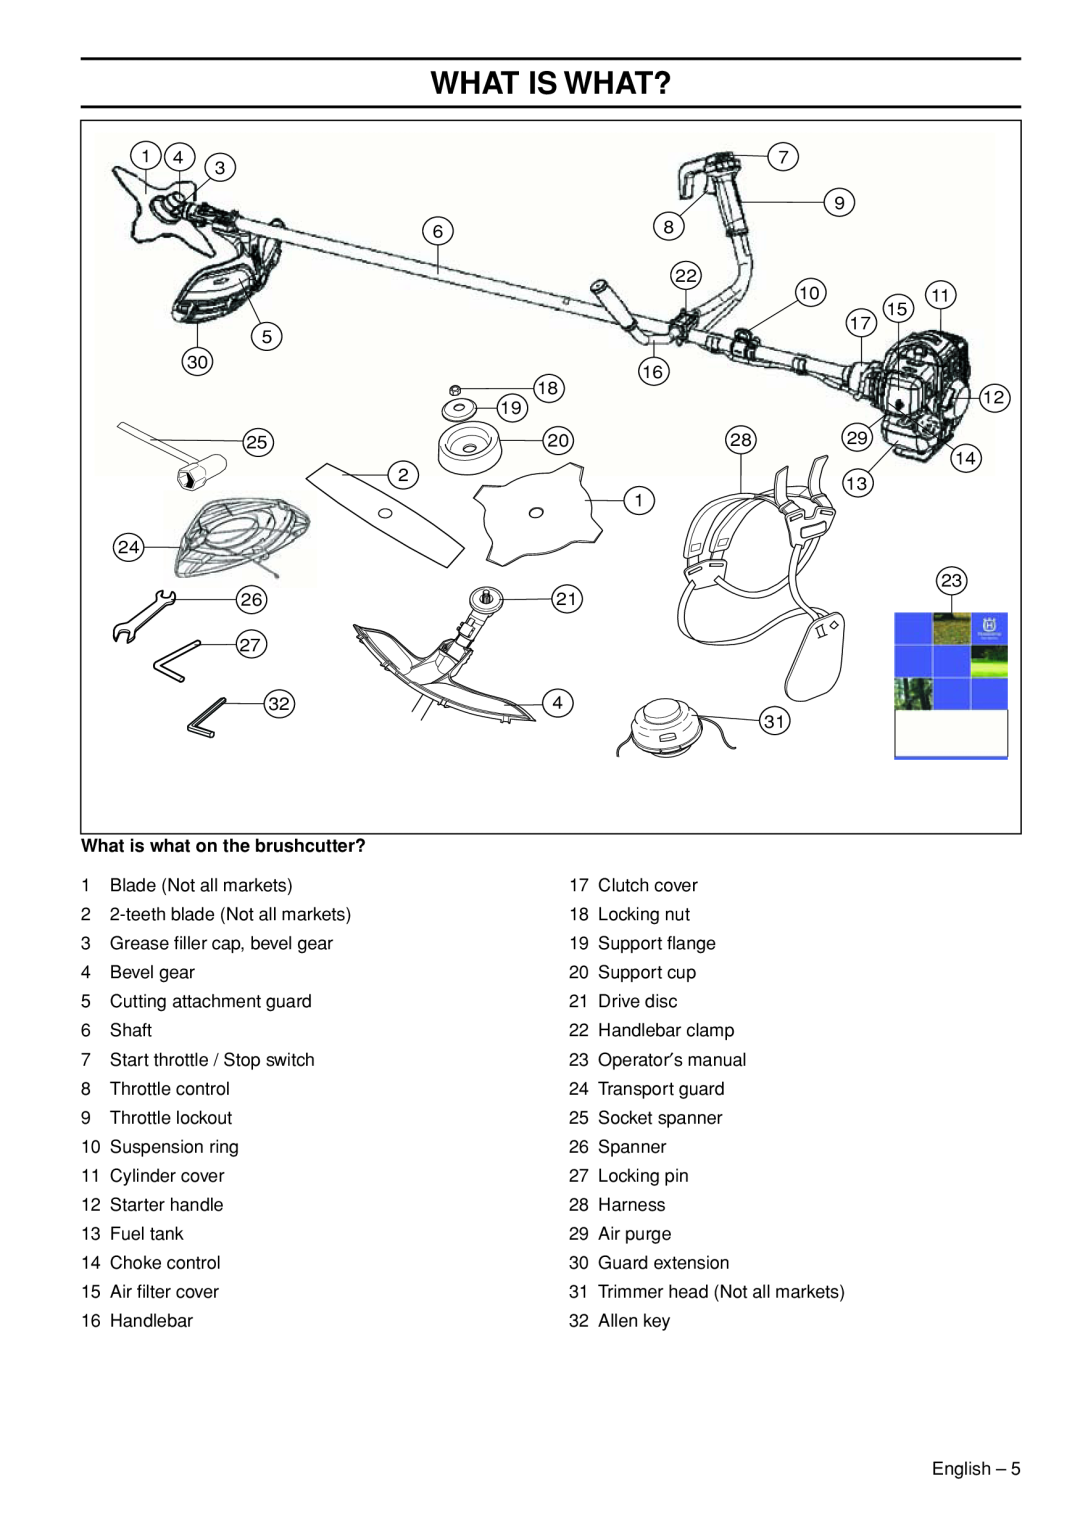 Husqvarna 143R-II manual What Is What?, What is what on the brushcutter? 